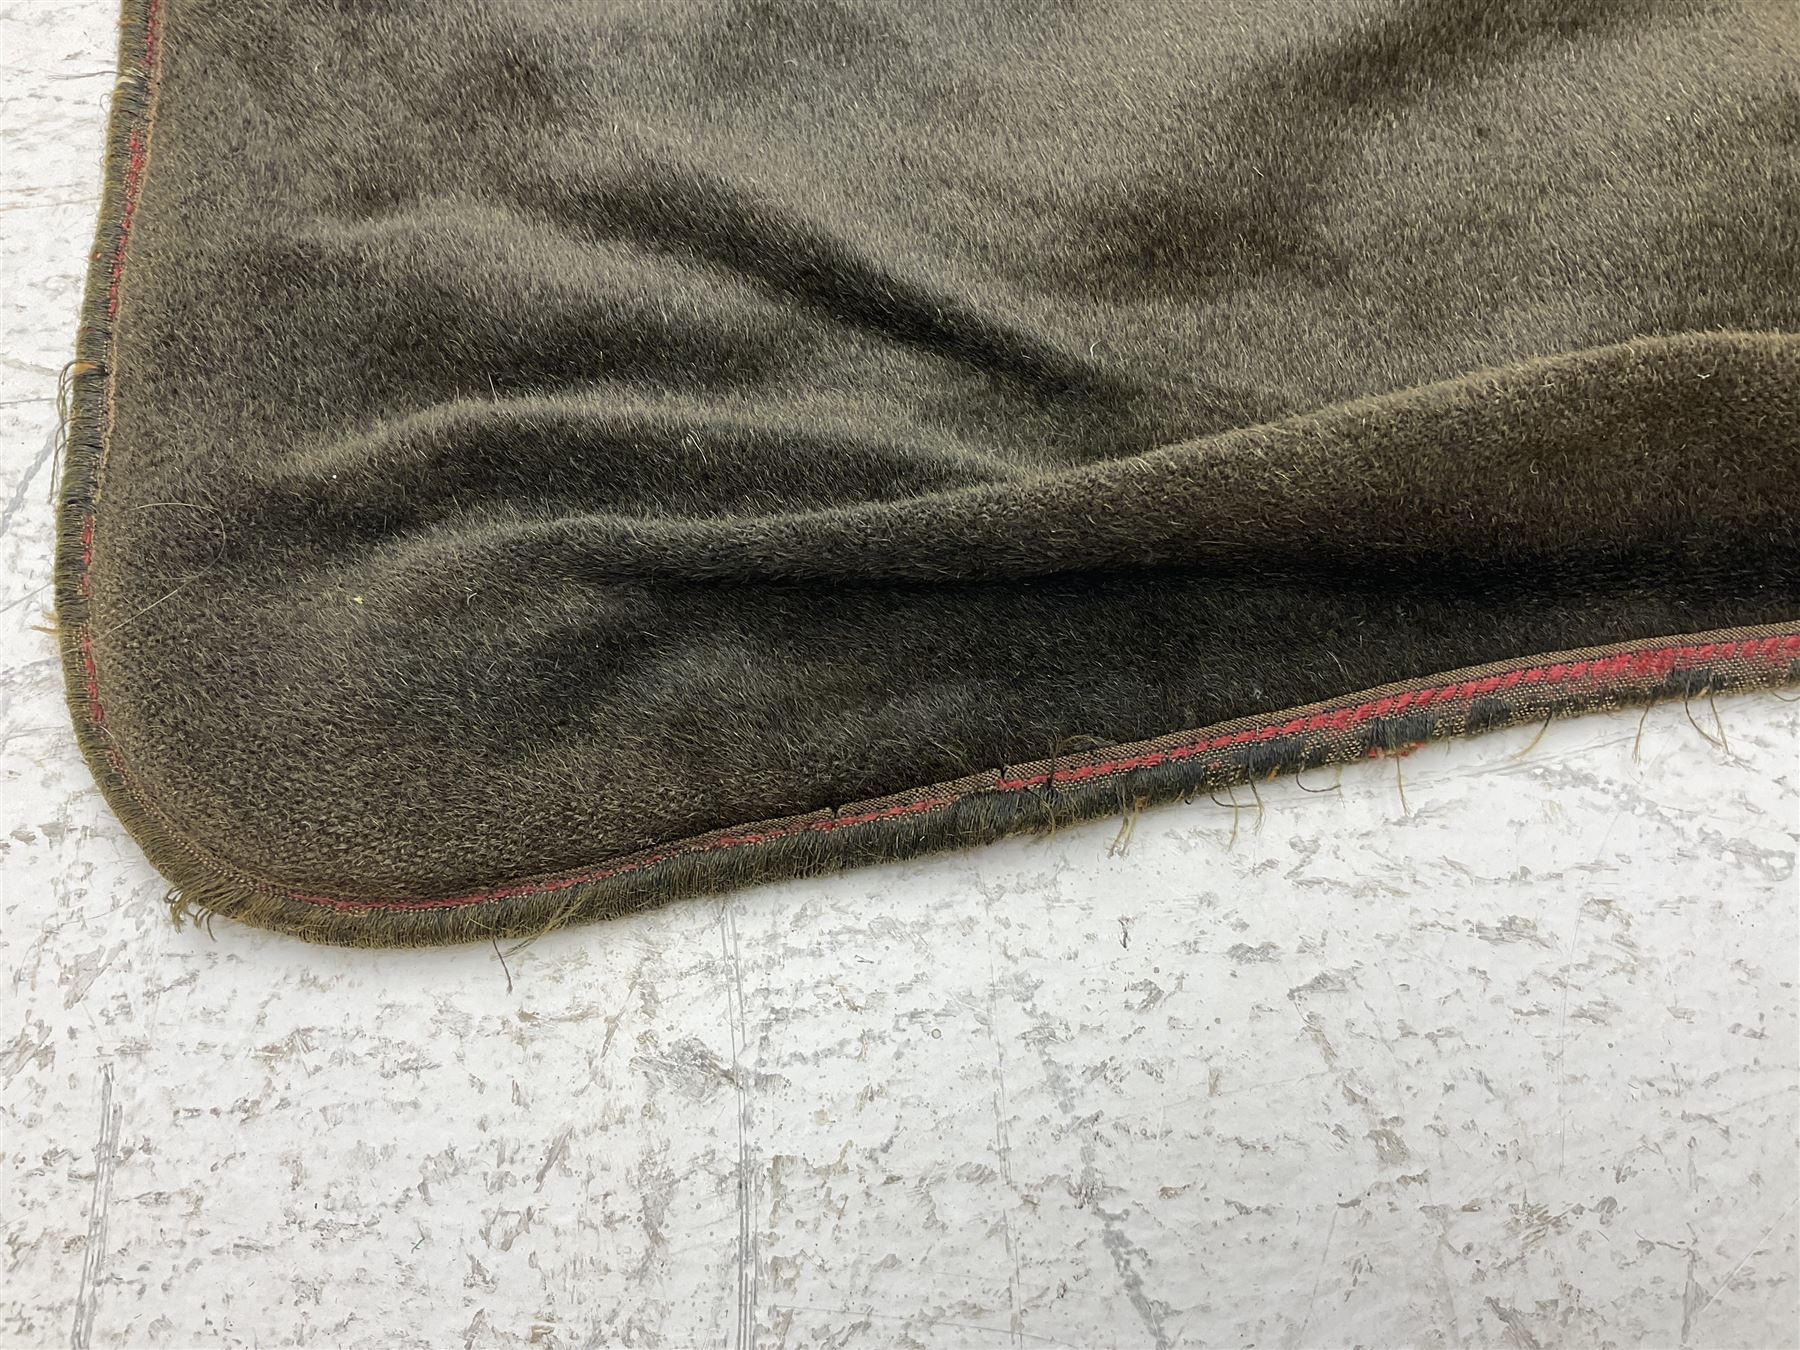 Late Victorian horsehair and angora carriage blanket or robe - Image 3 of 13